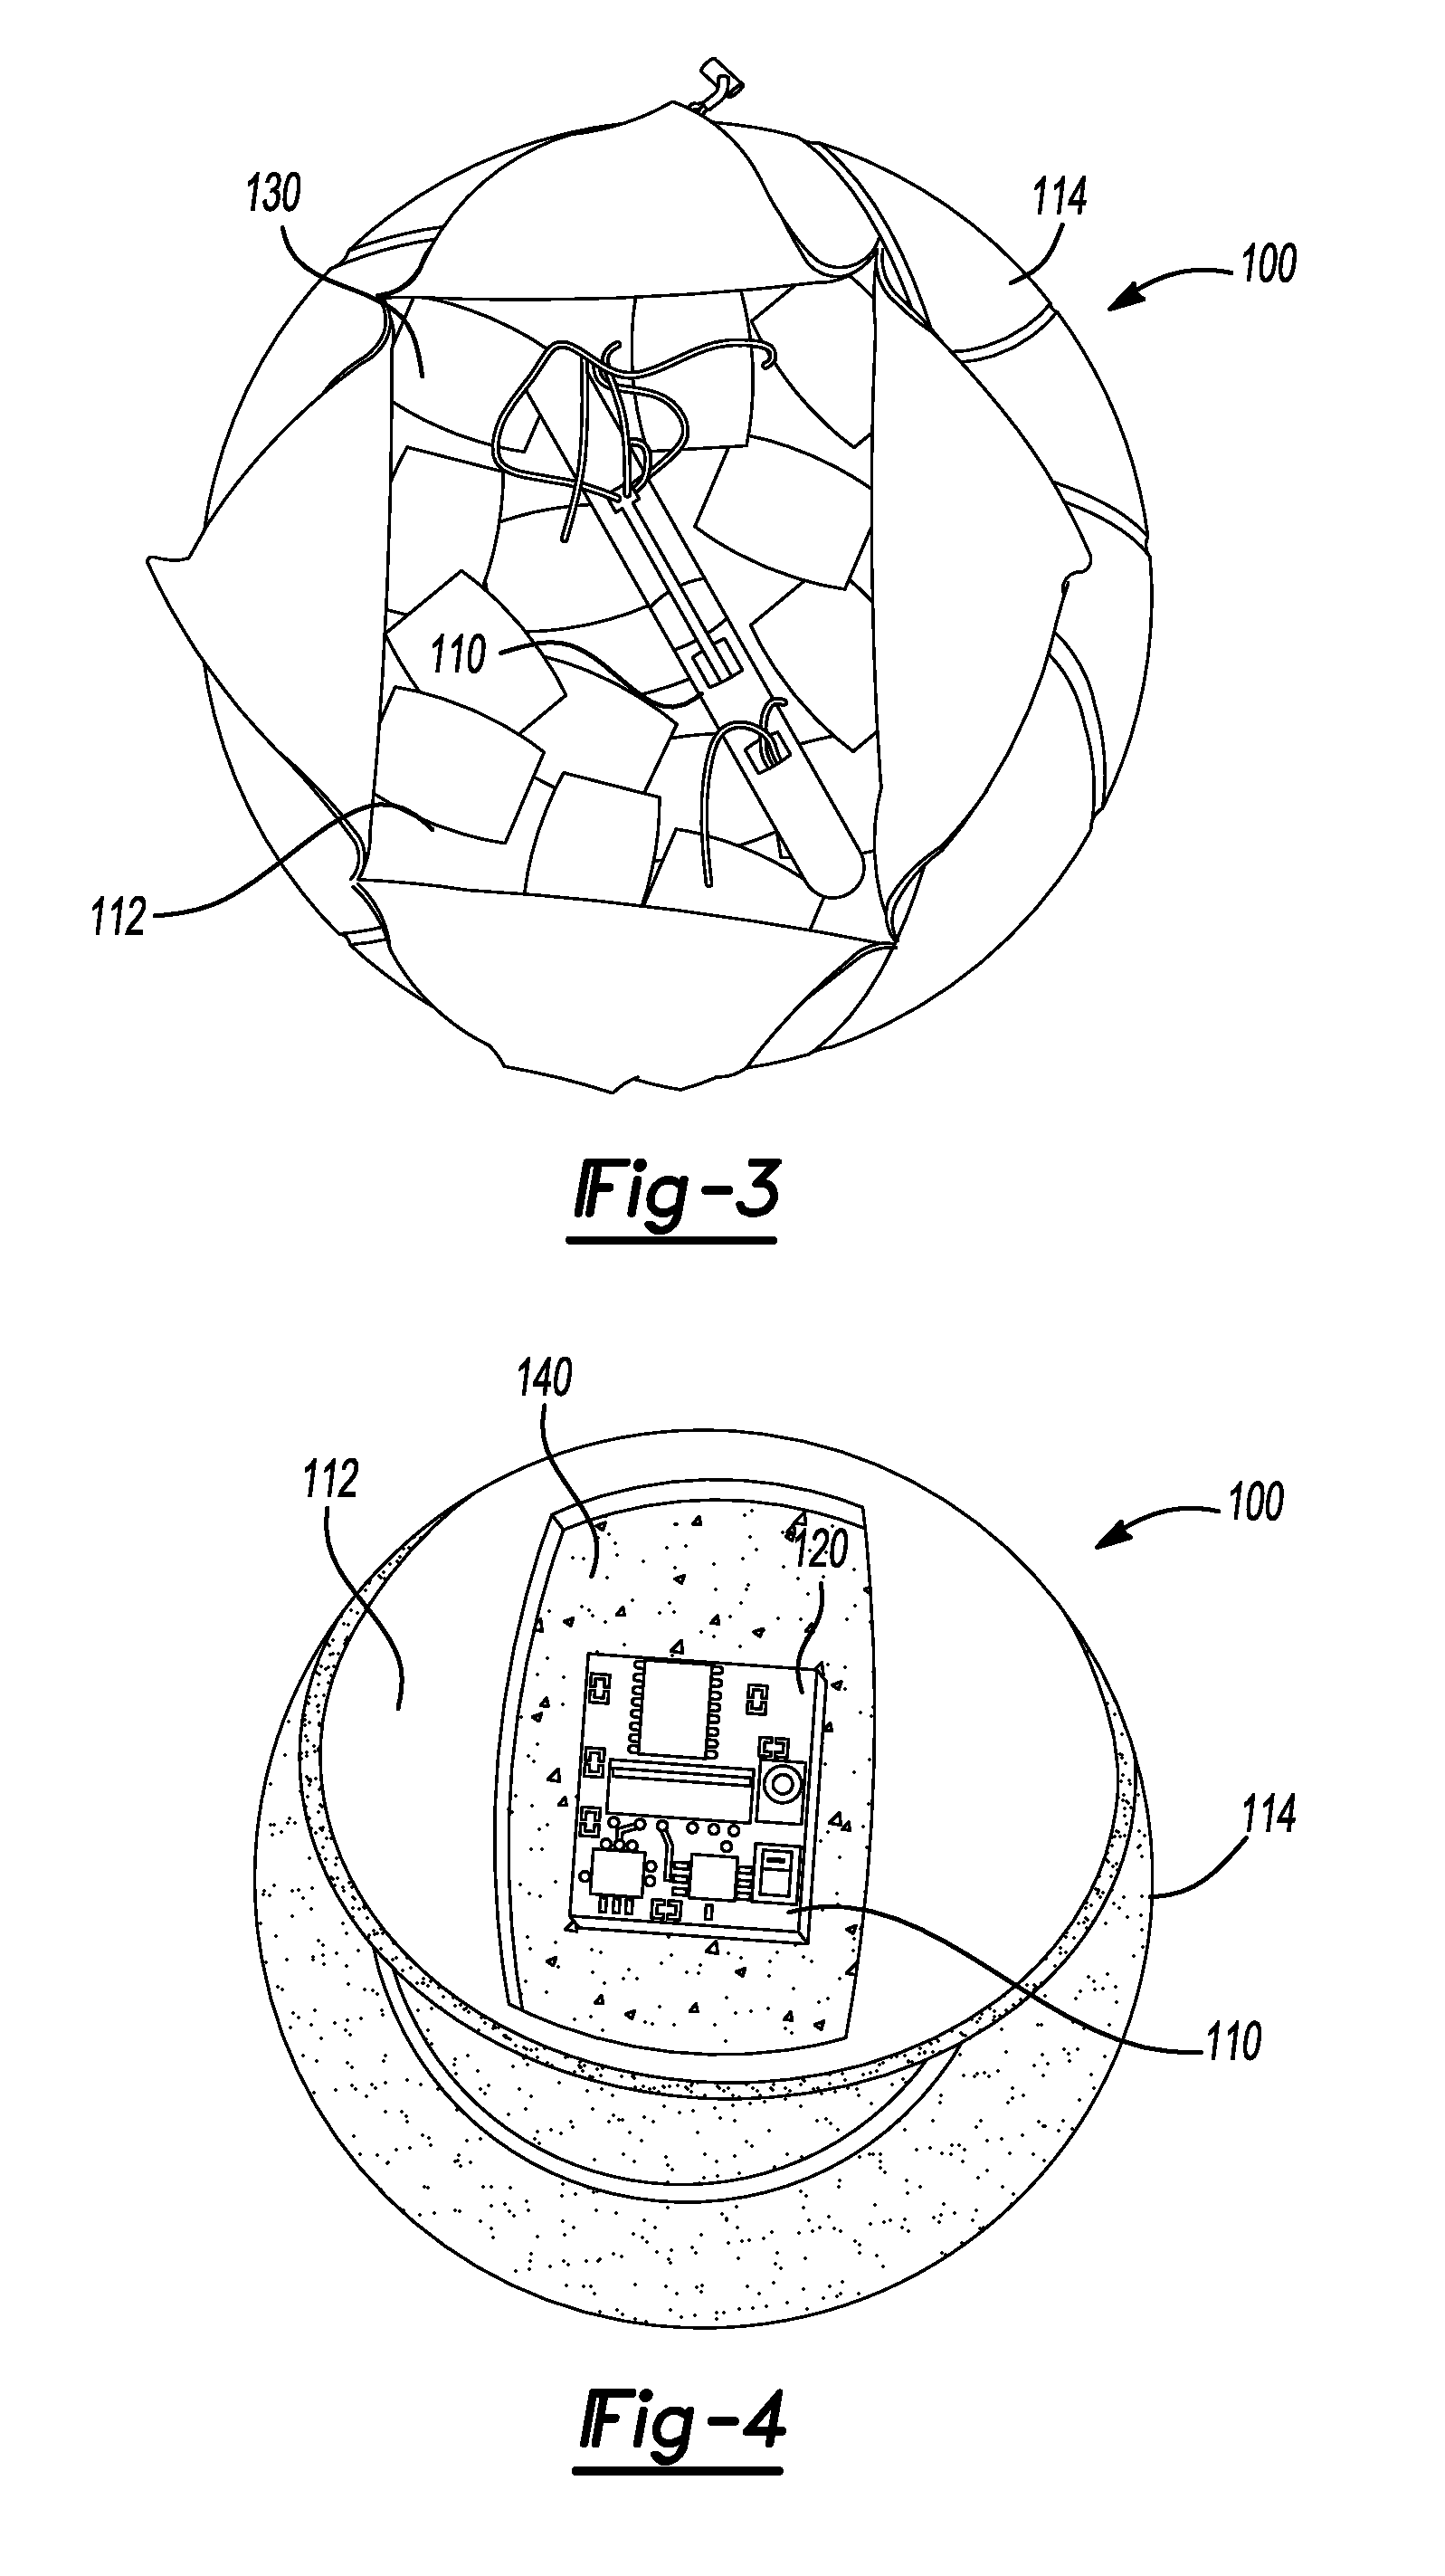 Apparatus and method for identifying and analyzing the free flight dynamics of a body